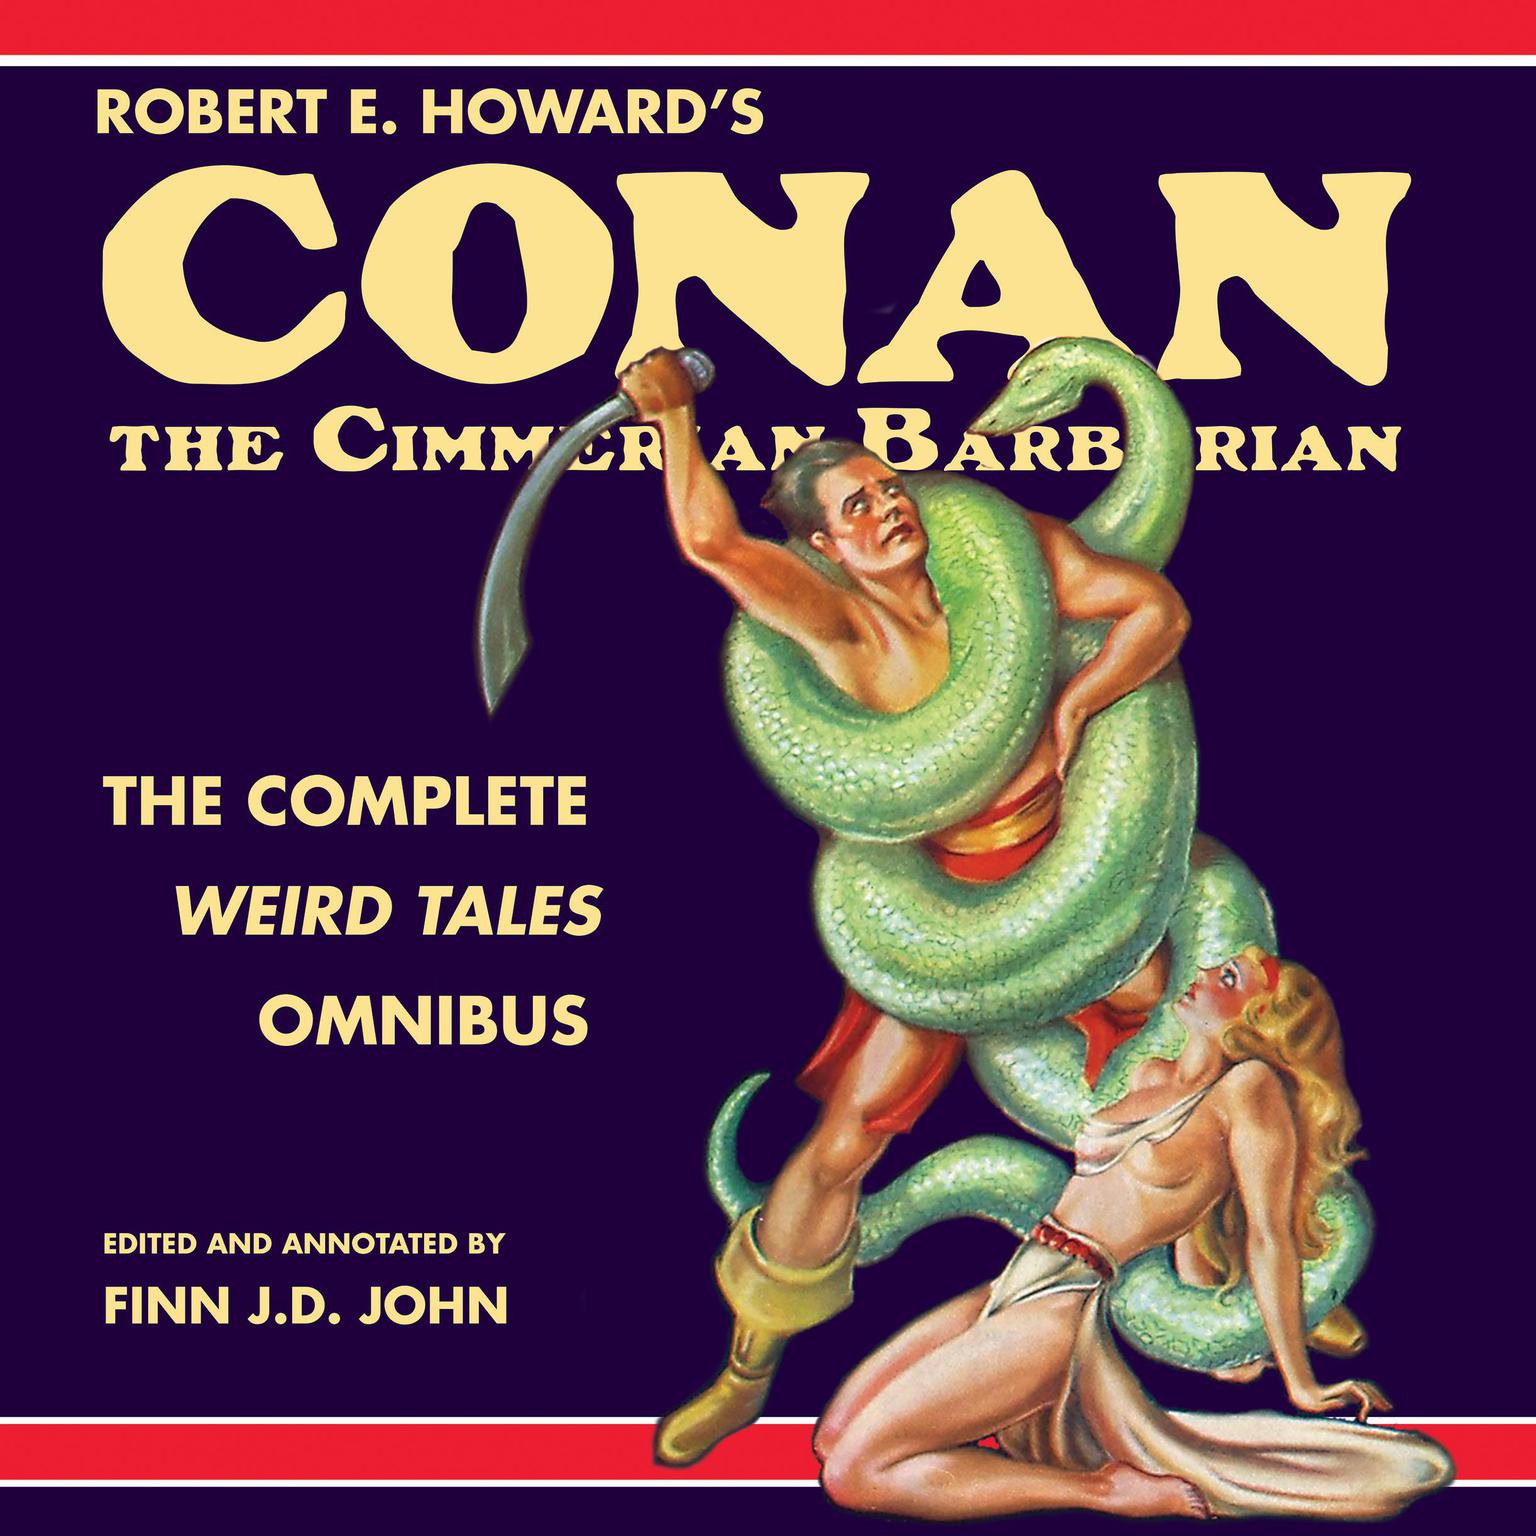 Robert E. Howards Conan the Cimmerian Barbarian: The Complete Weird Tales Omnibus:  The Complete Weird Tales Omnibus Audiobook, by Robert E. Howard